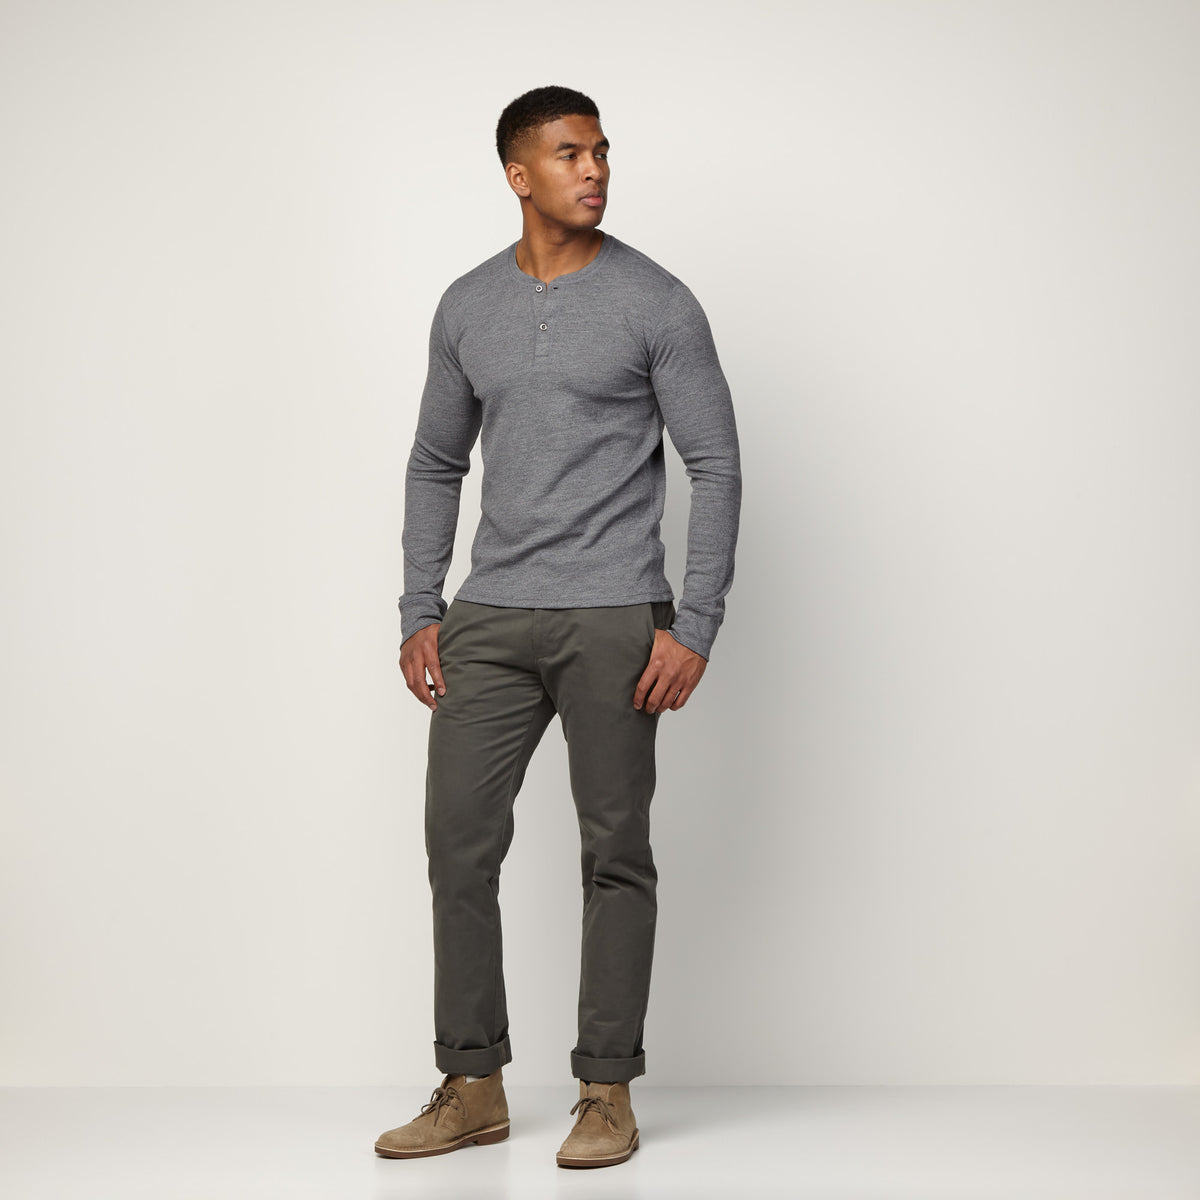 image-on-hover,model-spec: Micah is 6'1", 185 lbs, and wears size M